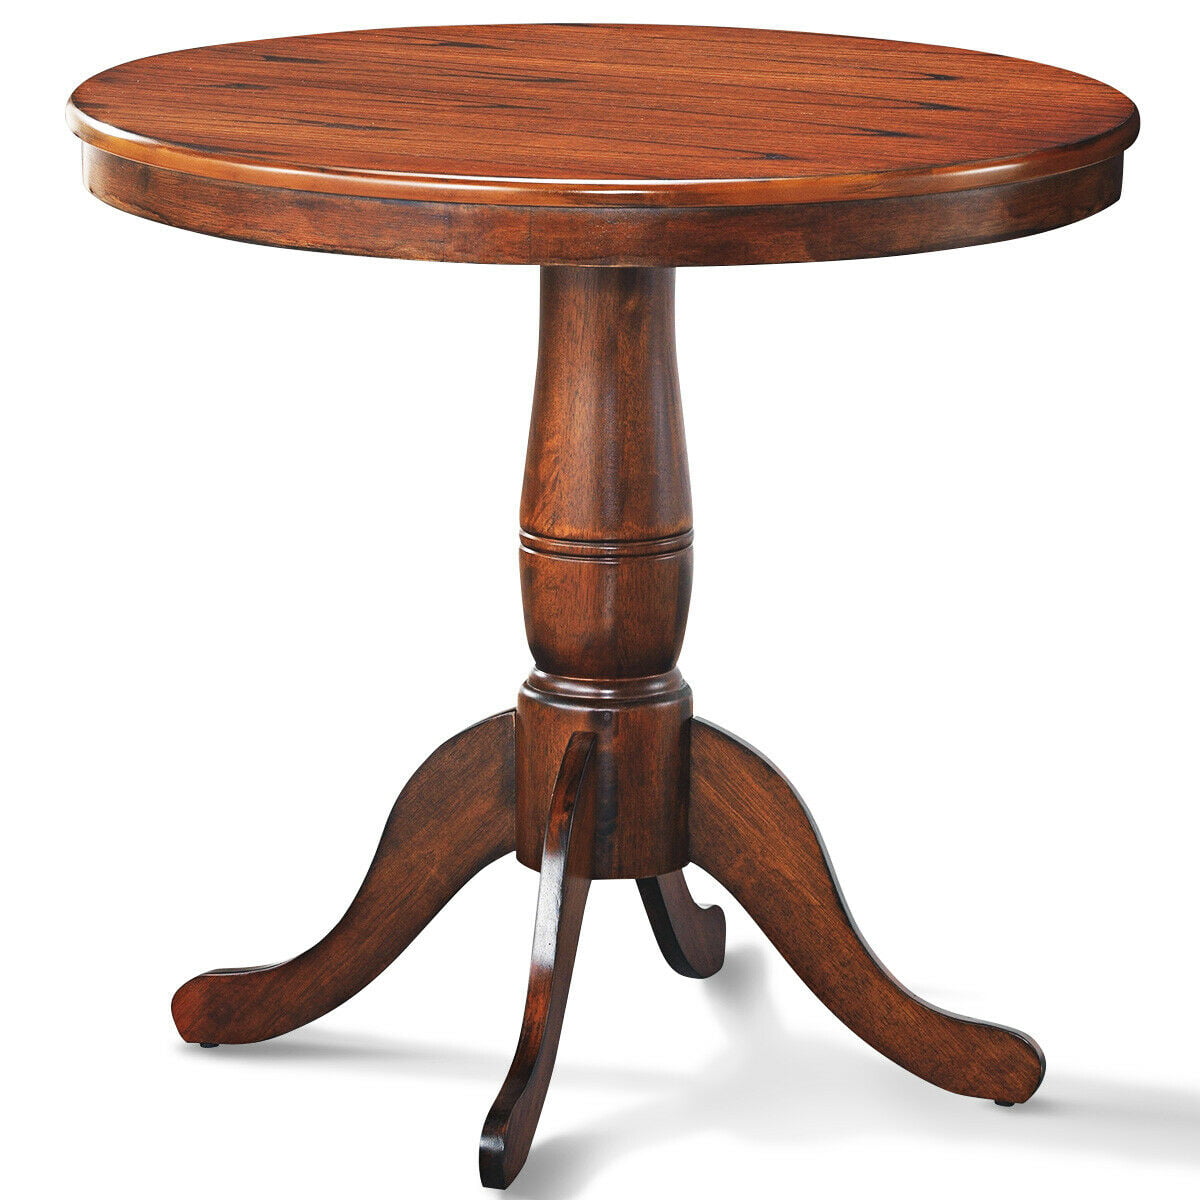 Gymax 32 Round Pedestal Dining Table, Round Table Dublin California